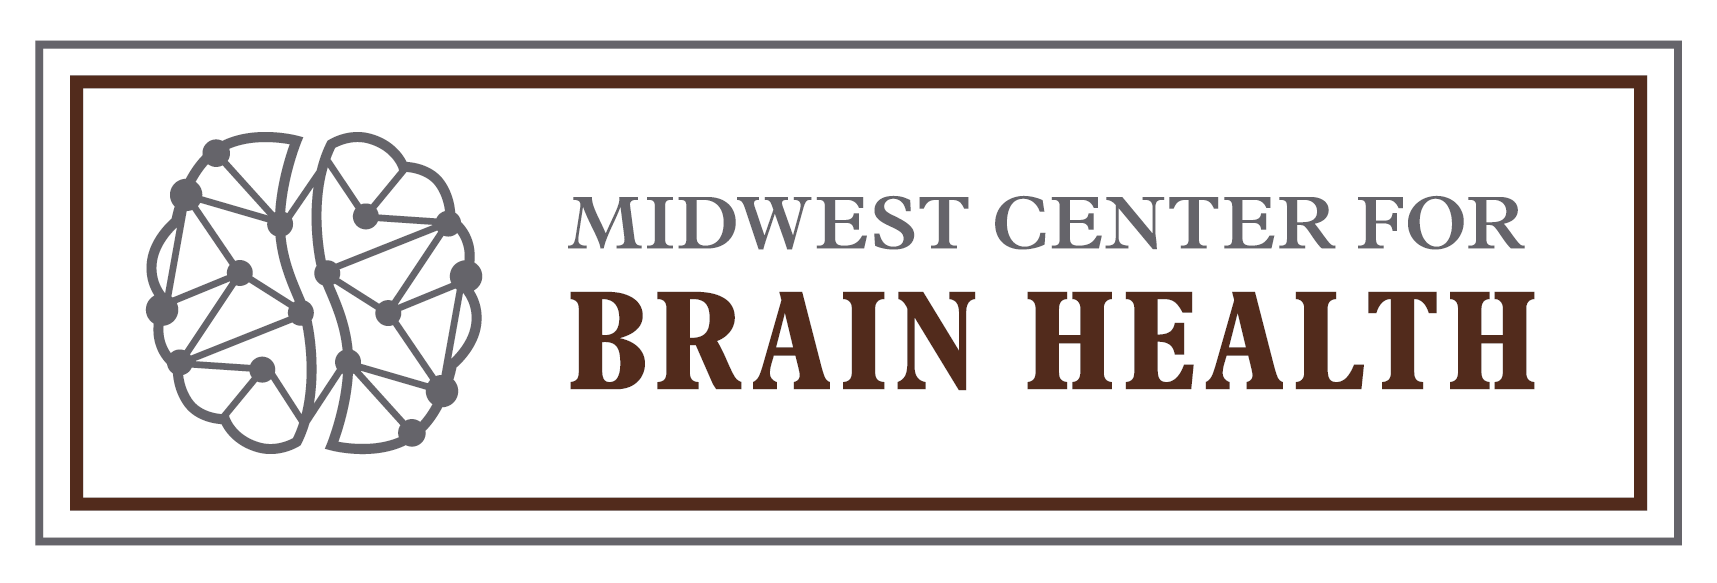 C. Midwest Center for Brain Health (Silver)